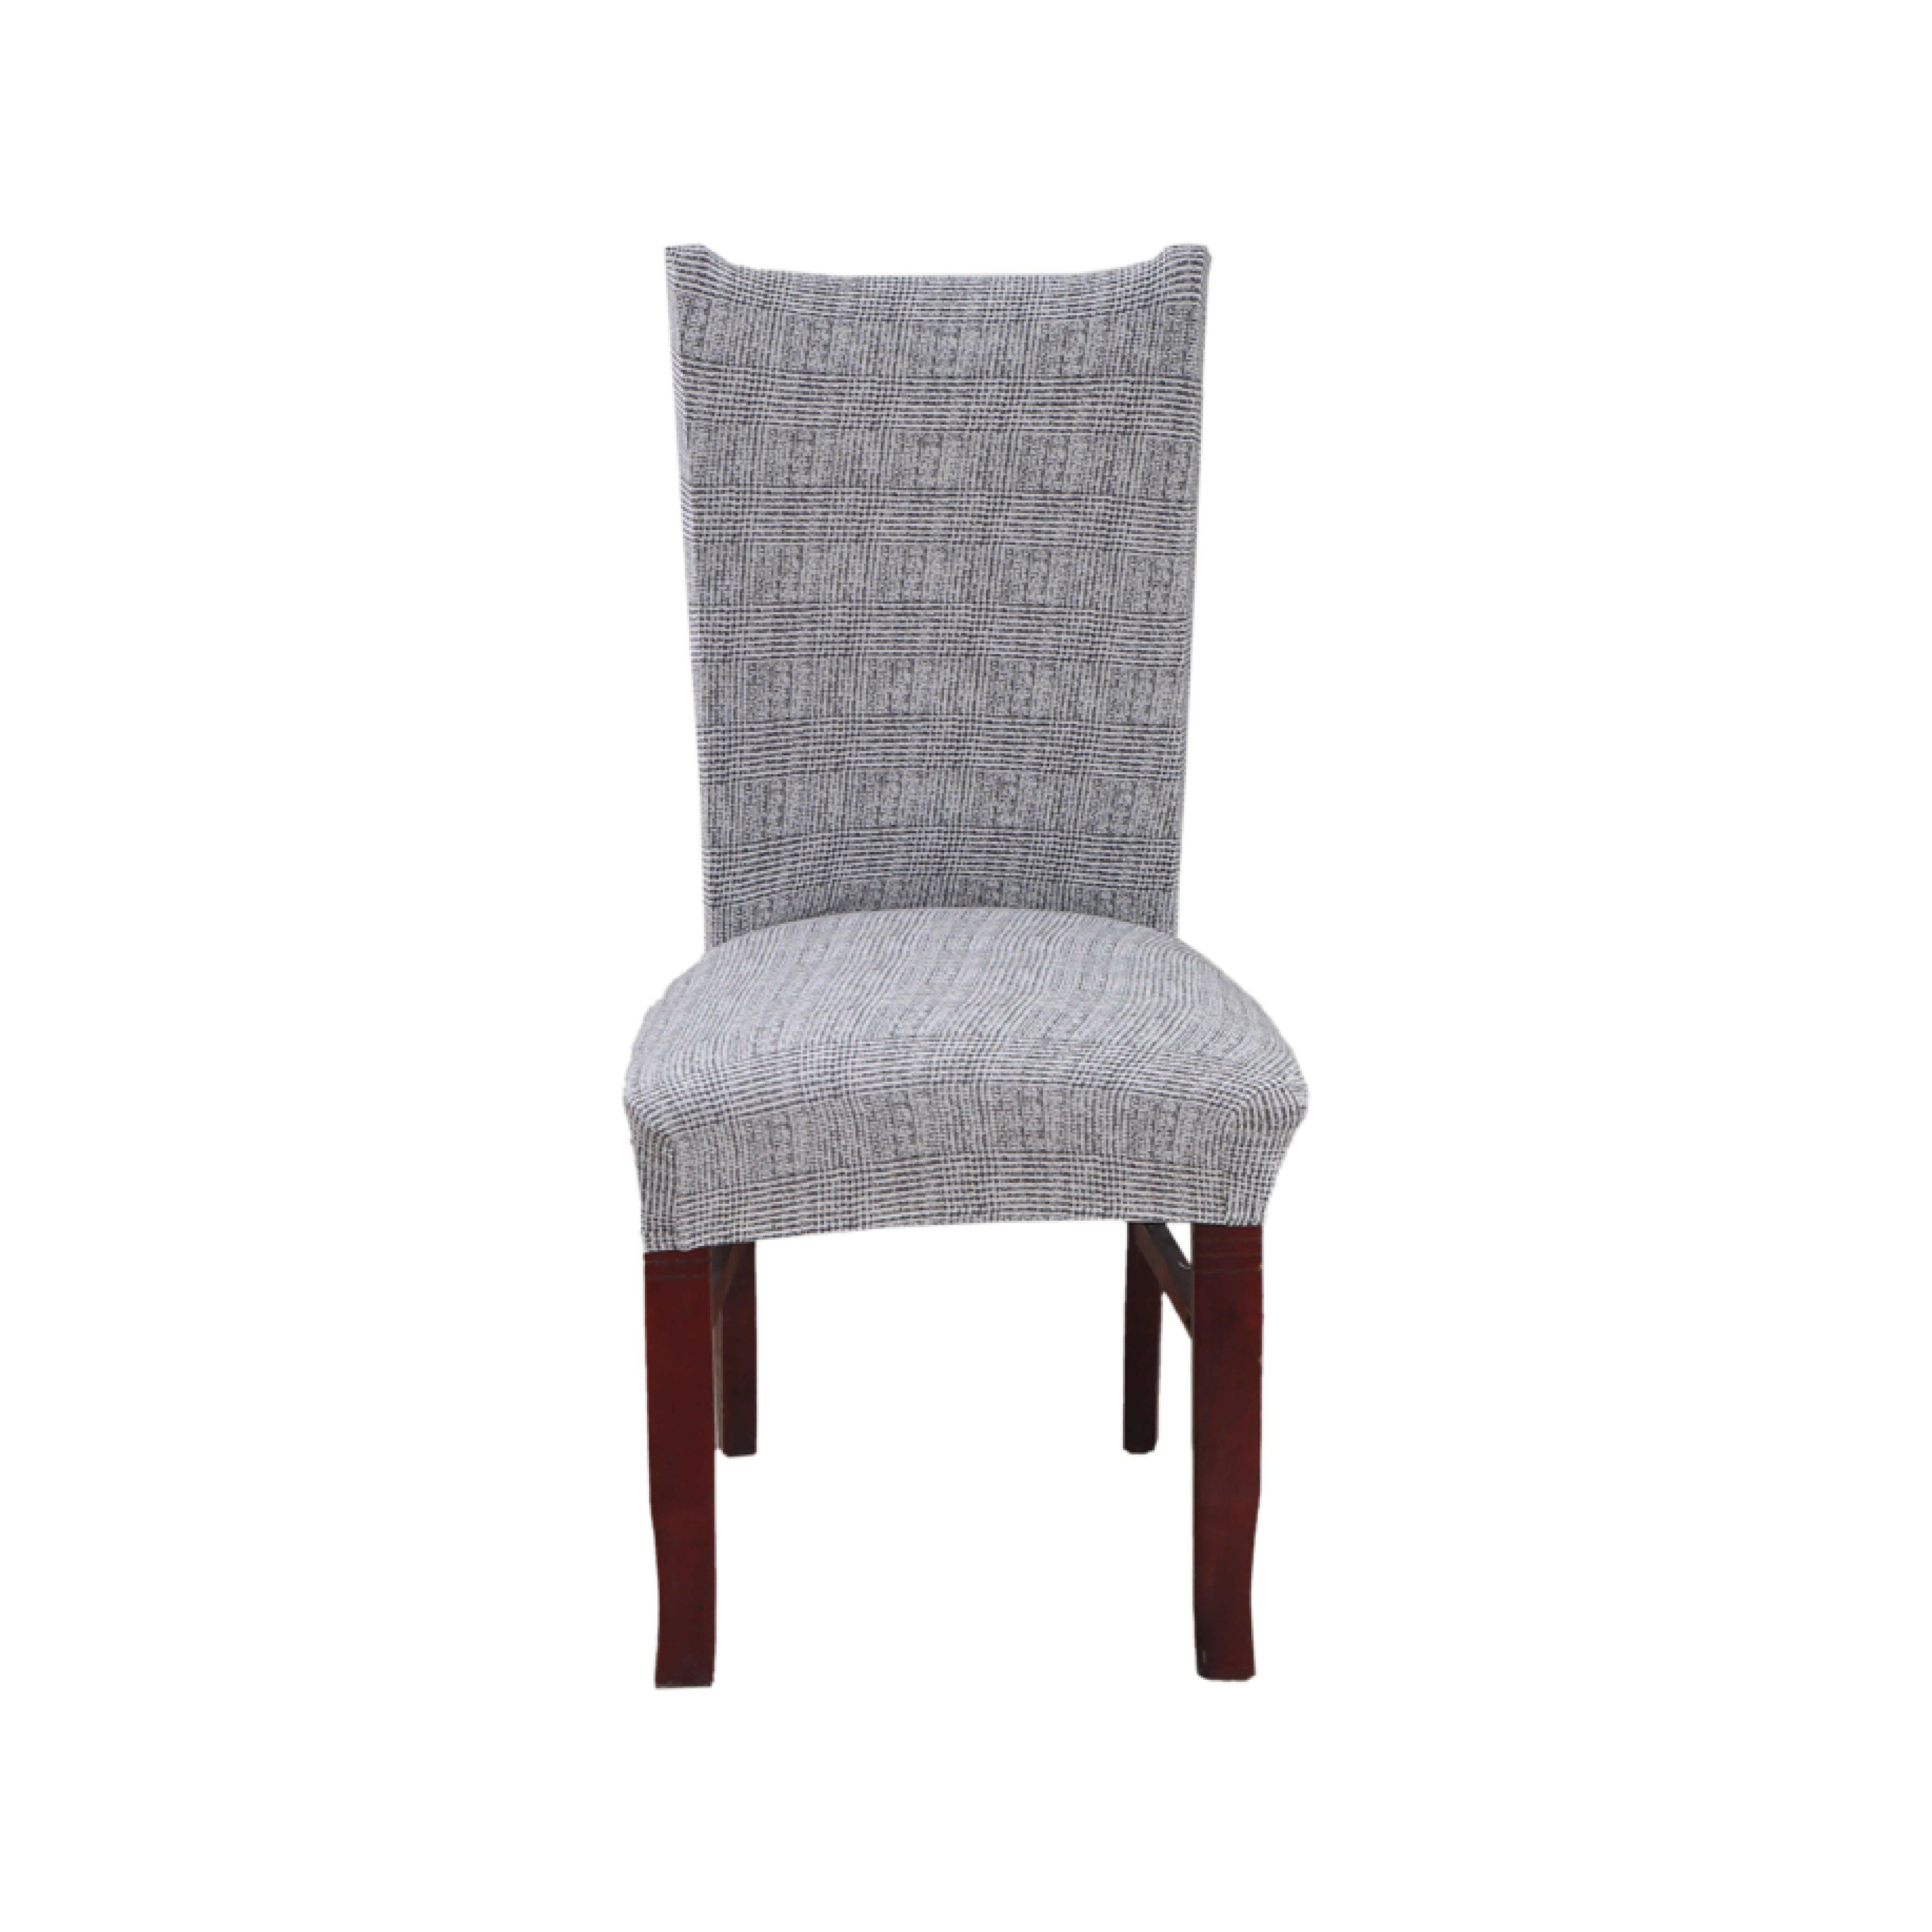 Hyper Cover Stretch Dining Chair Covers with Patterns Elegant Grey | Chair Covers | Brilliant Home Living